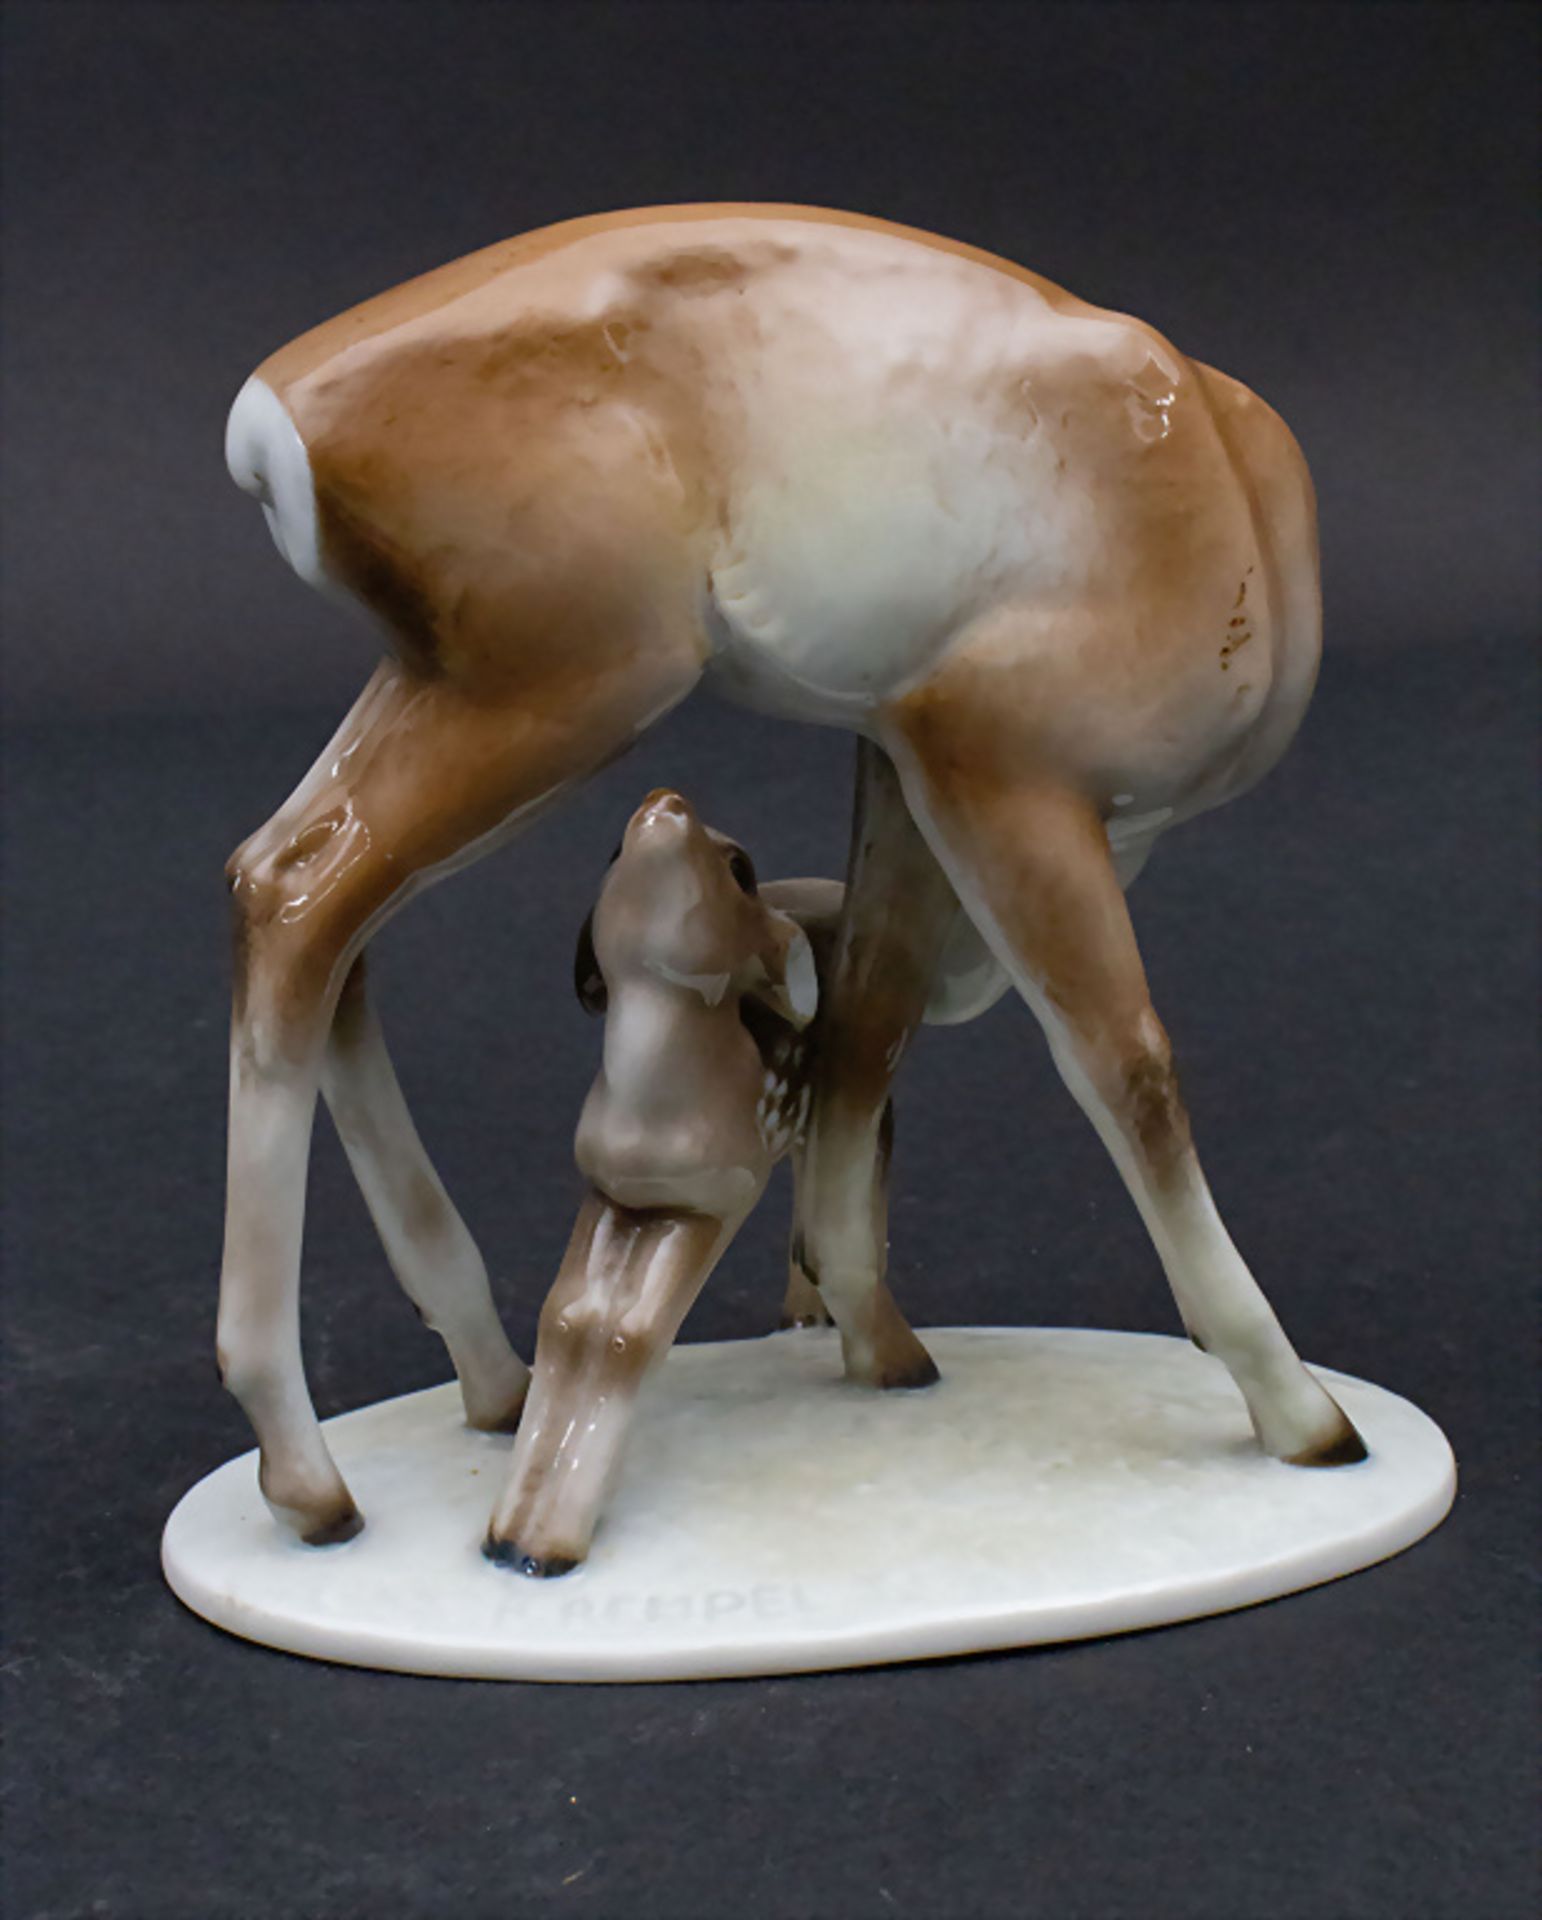 Reh mit Rehkitz / A deer with a fawn, Rudolf Rempel, Rosenthal, Selb, um 1937 - Image 3 of 7